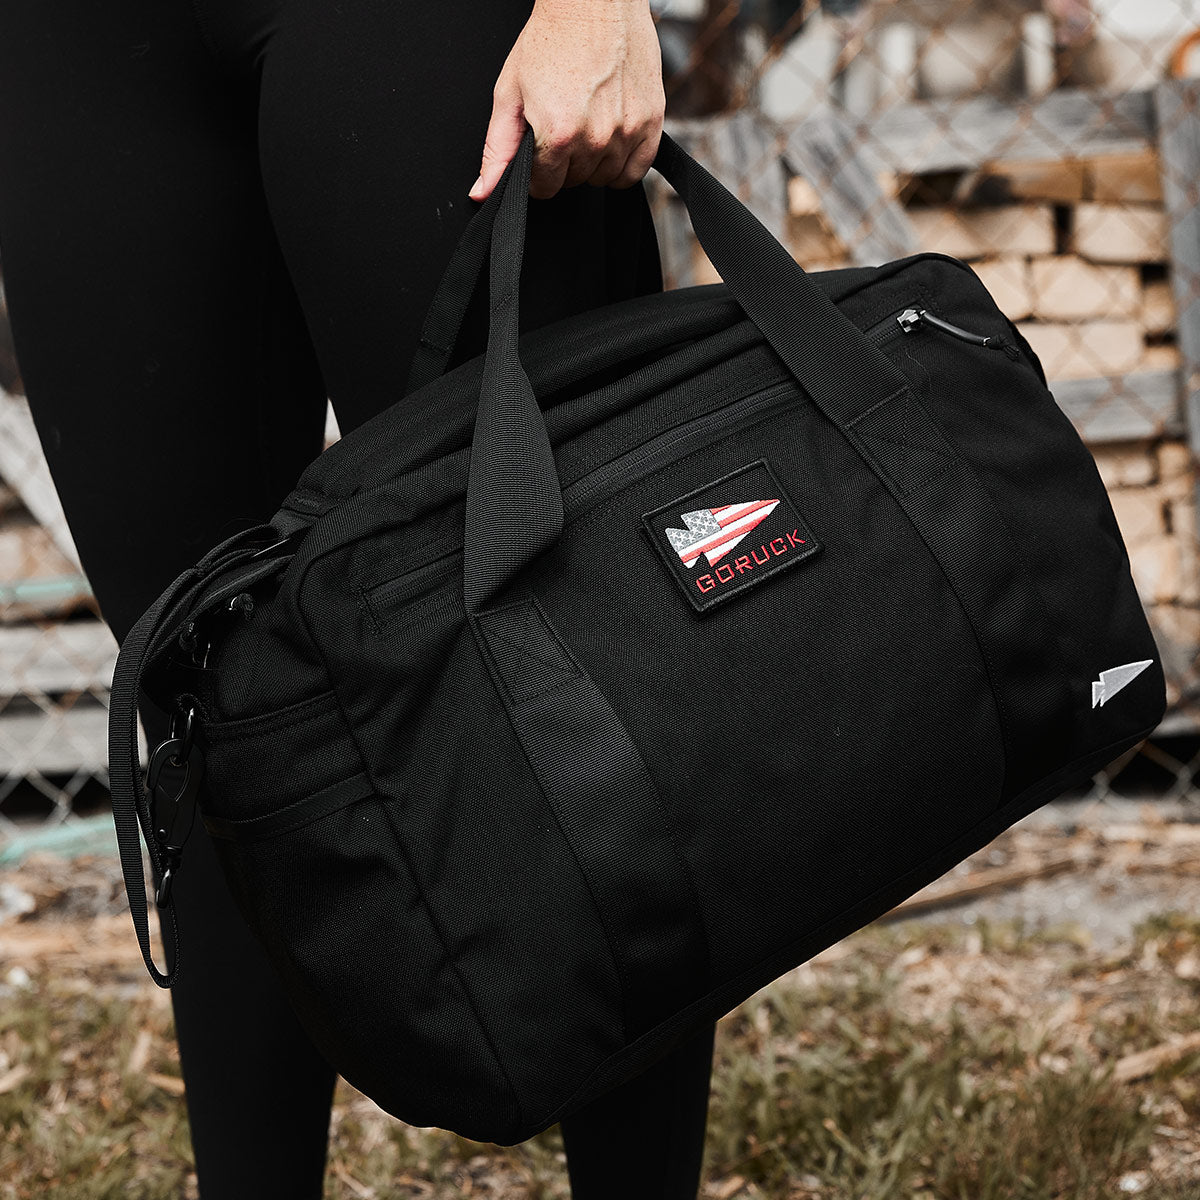 Drive By :: GORUCK GR1 Backpack - Carryology